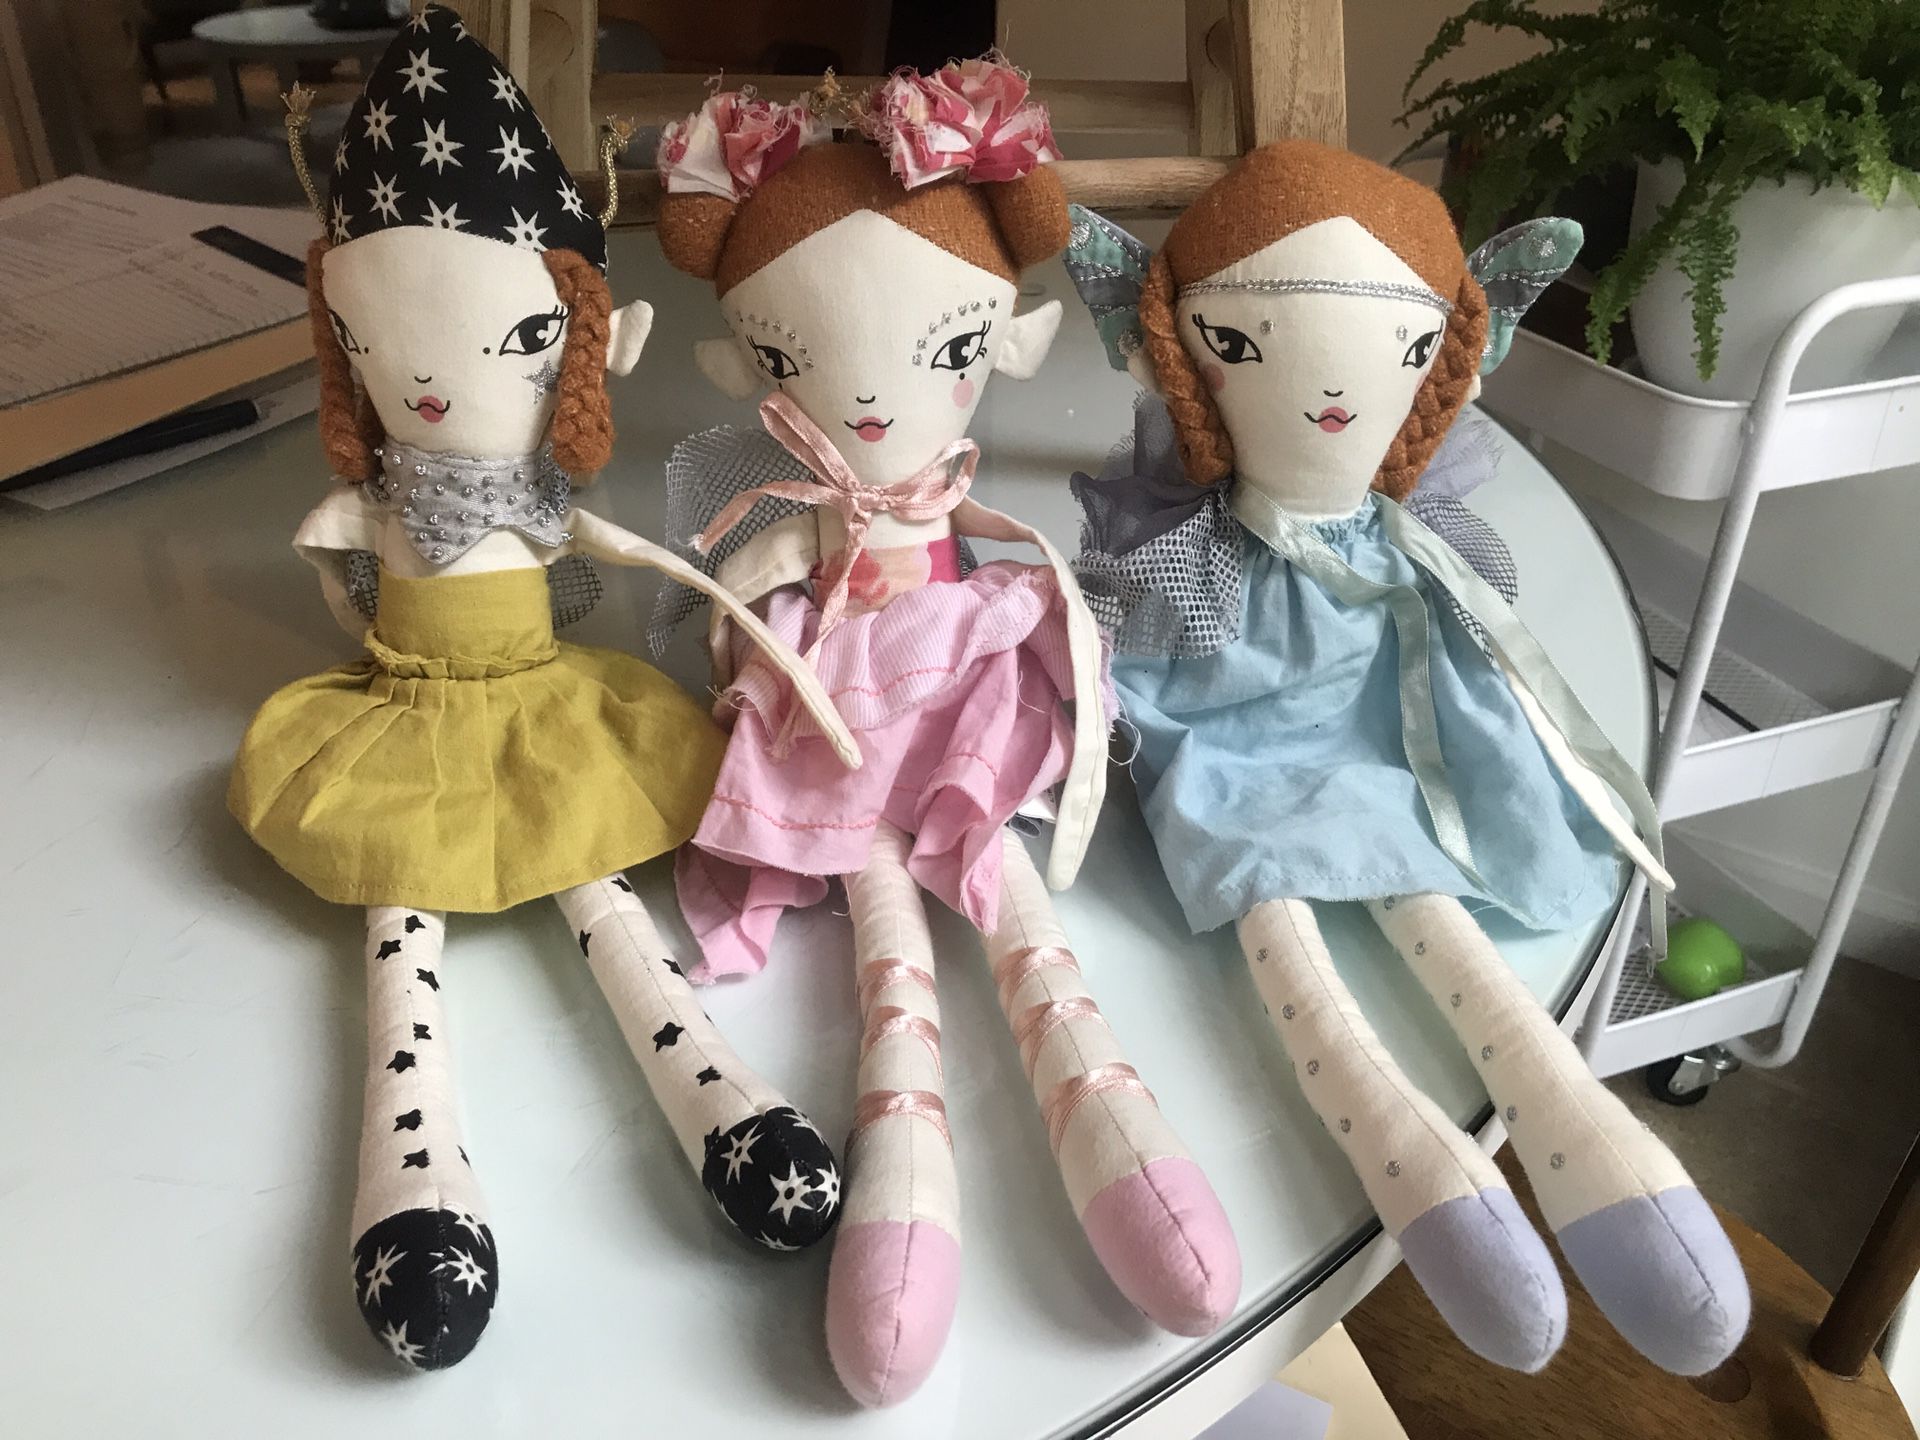 Three adorable fairy dolls from land of nod